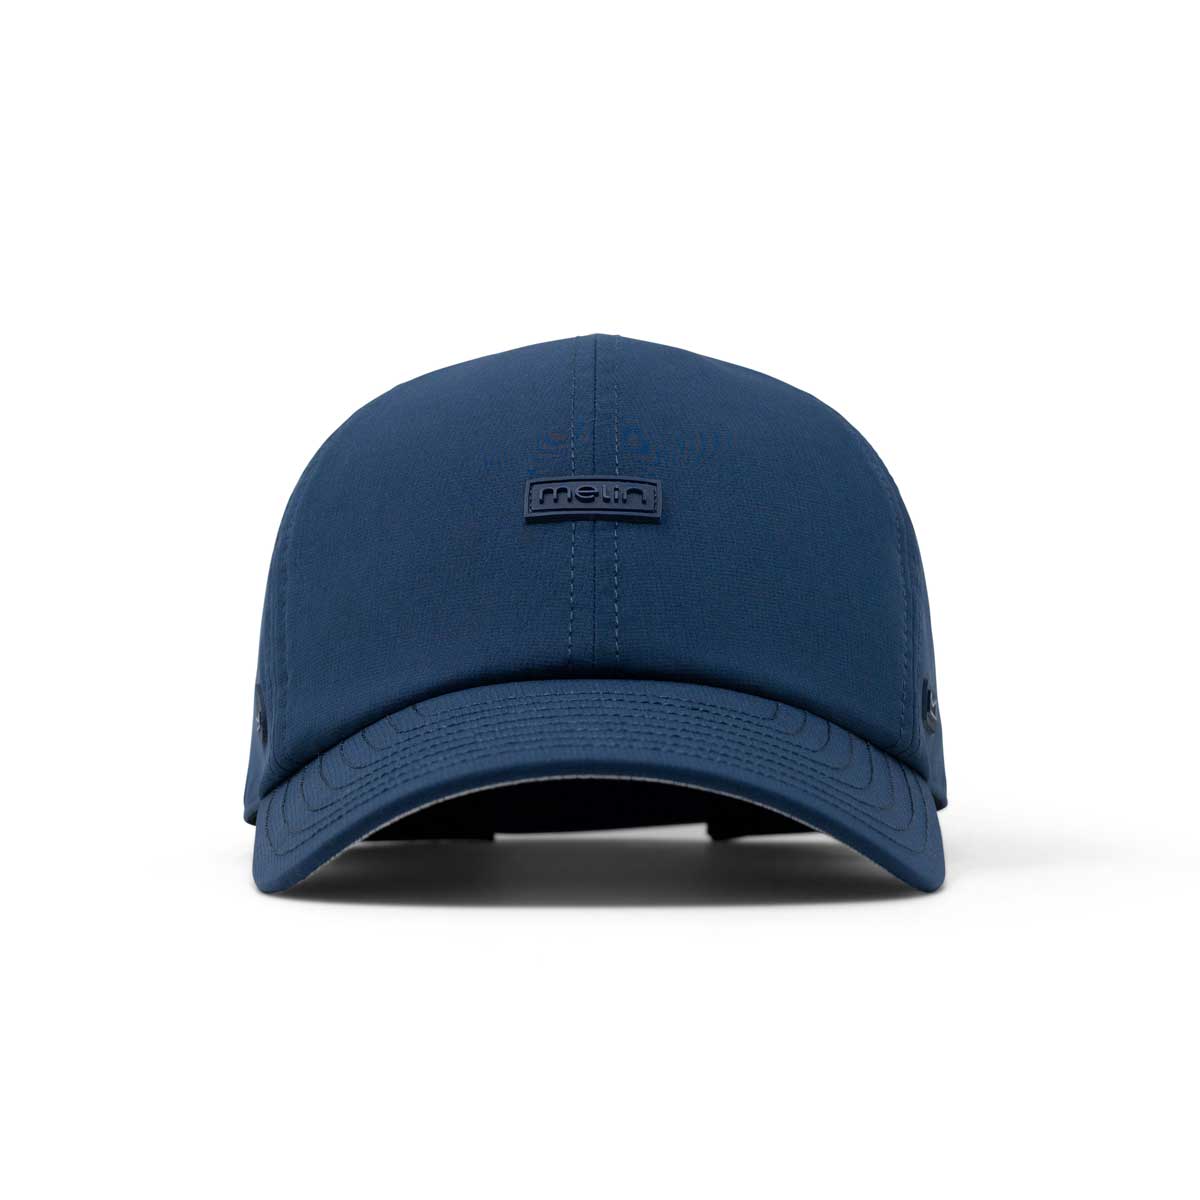 Melin: The Legend Hydro Hat - NAVY